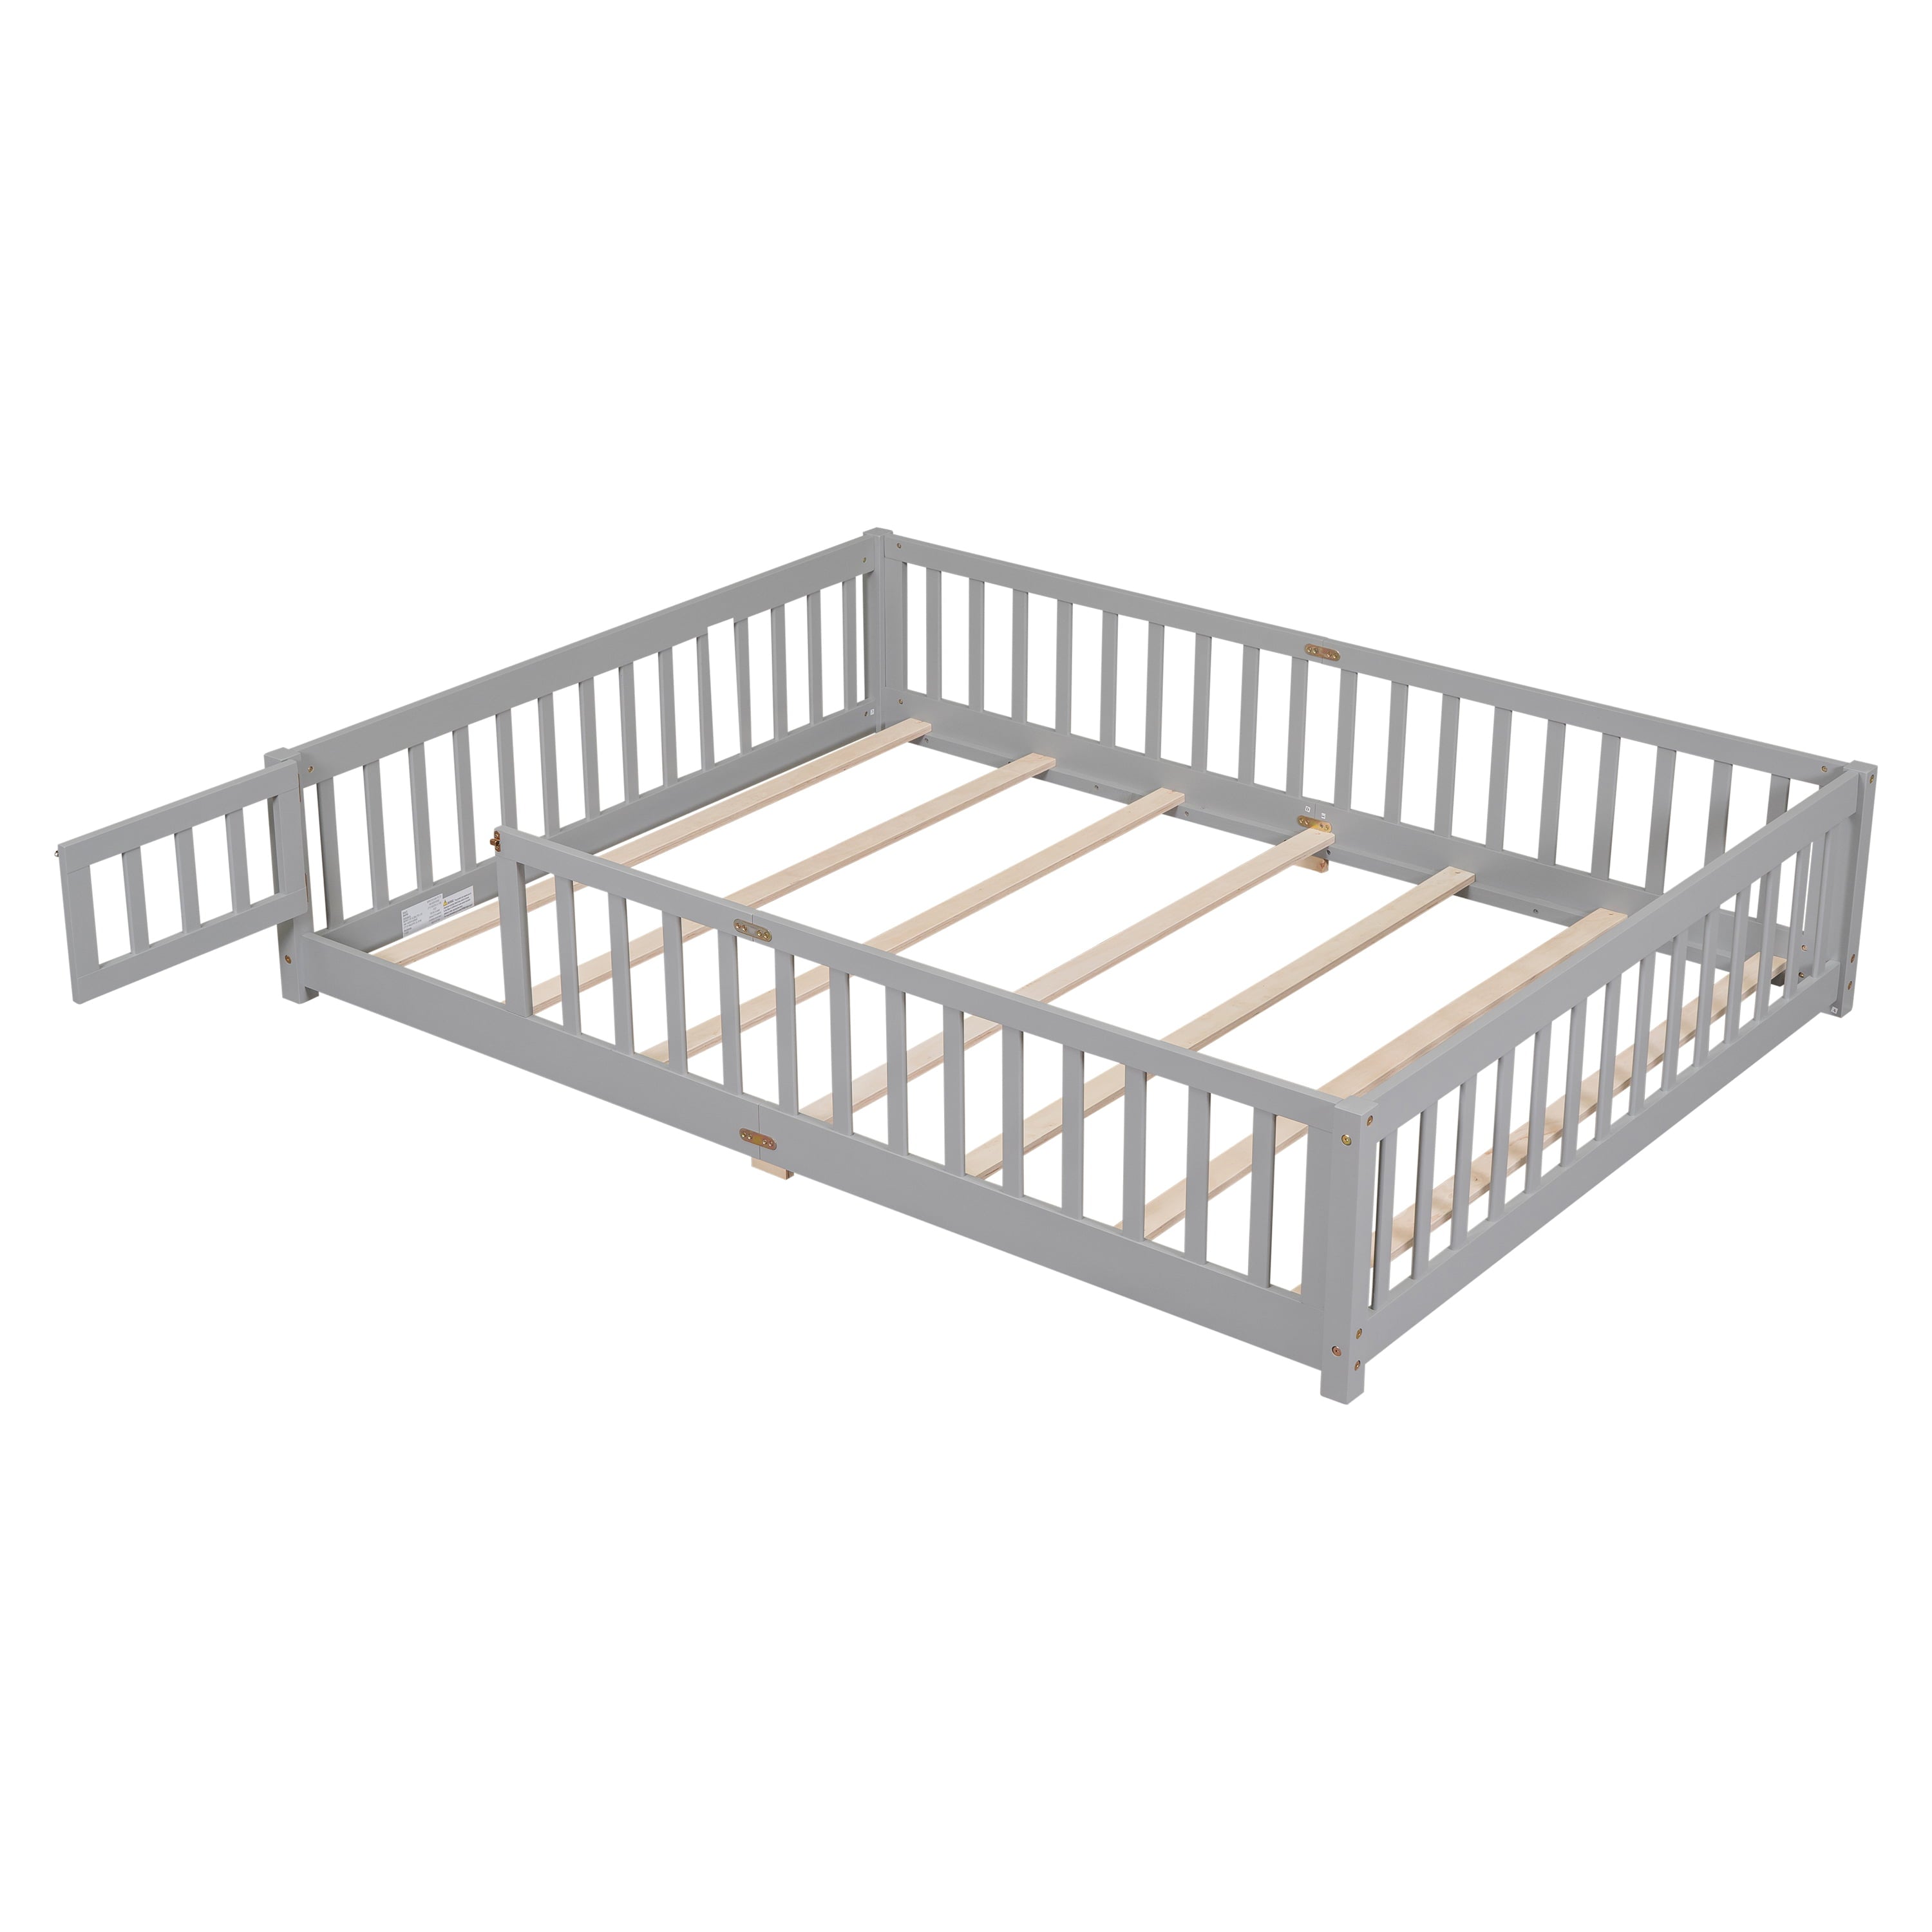 uhomepro Queen Size Wood Floor Bed Frame with Fence and Door for Kids, Toddlers, Gray